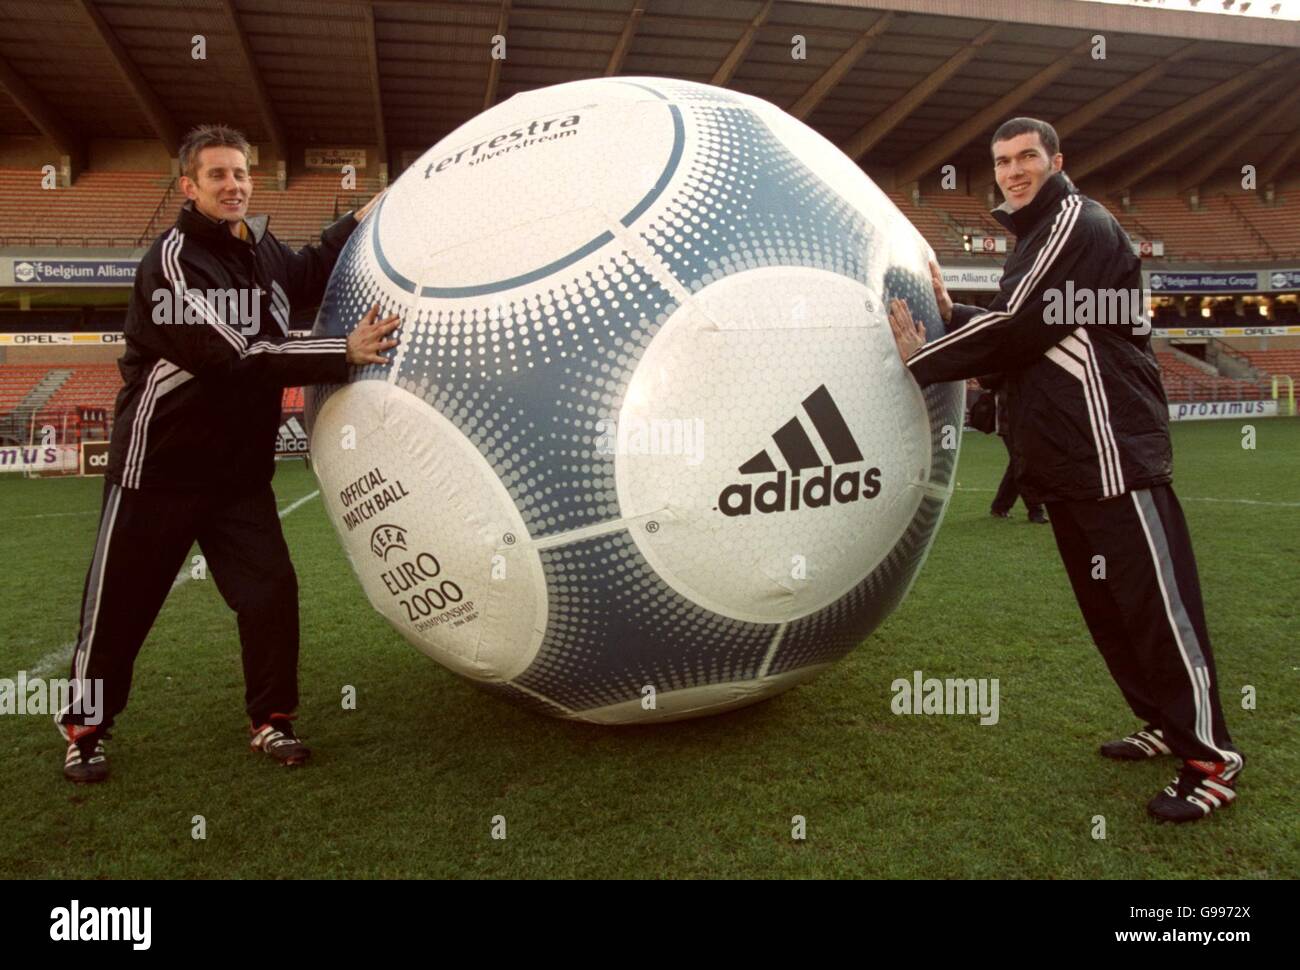 Soccer - New Adidas ball for Euro 2000 